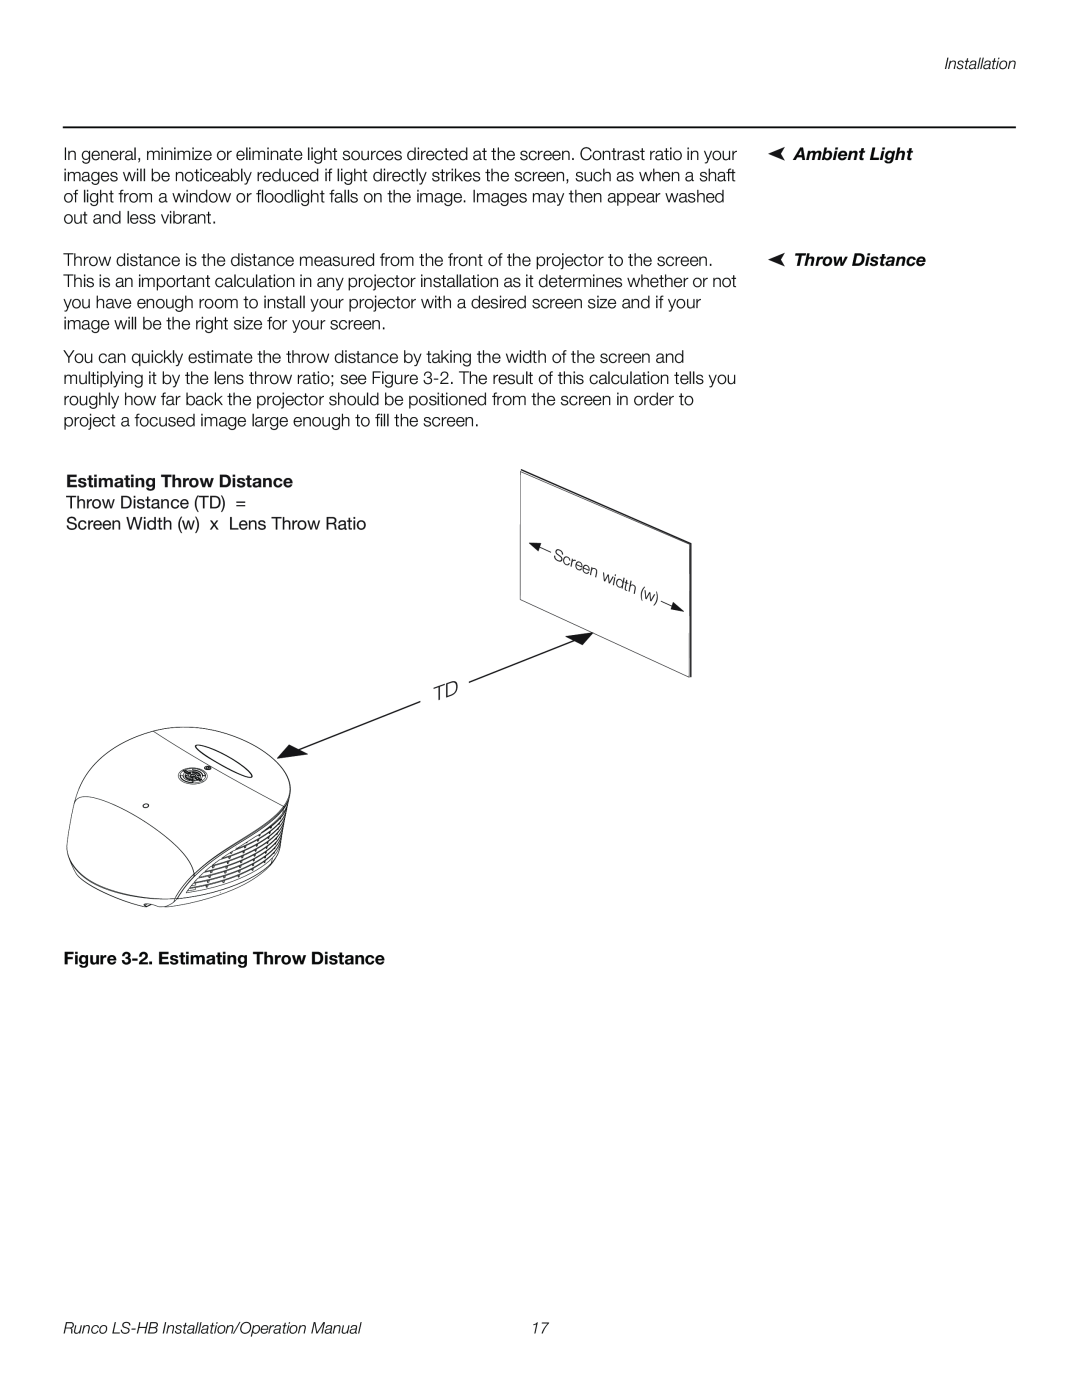 Runco LS-HB operation manual Ambient Light, 2. Estimating Throw Distance 